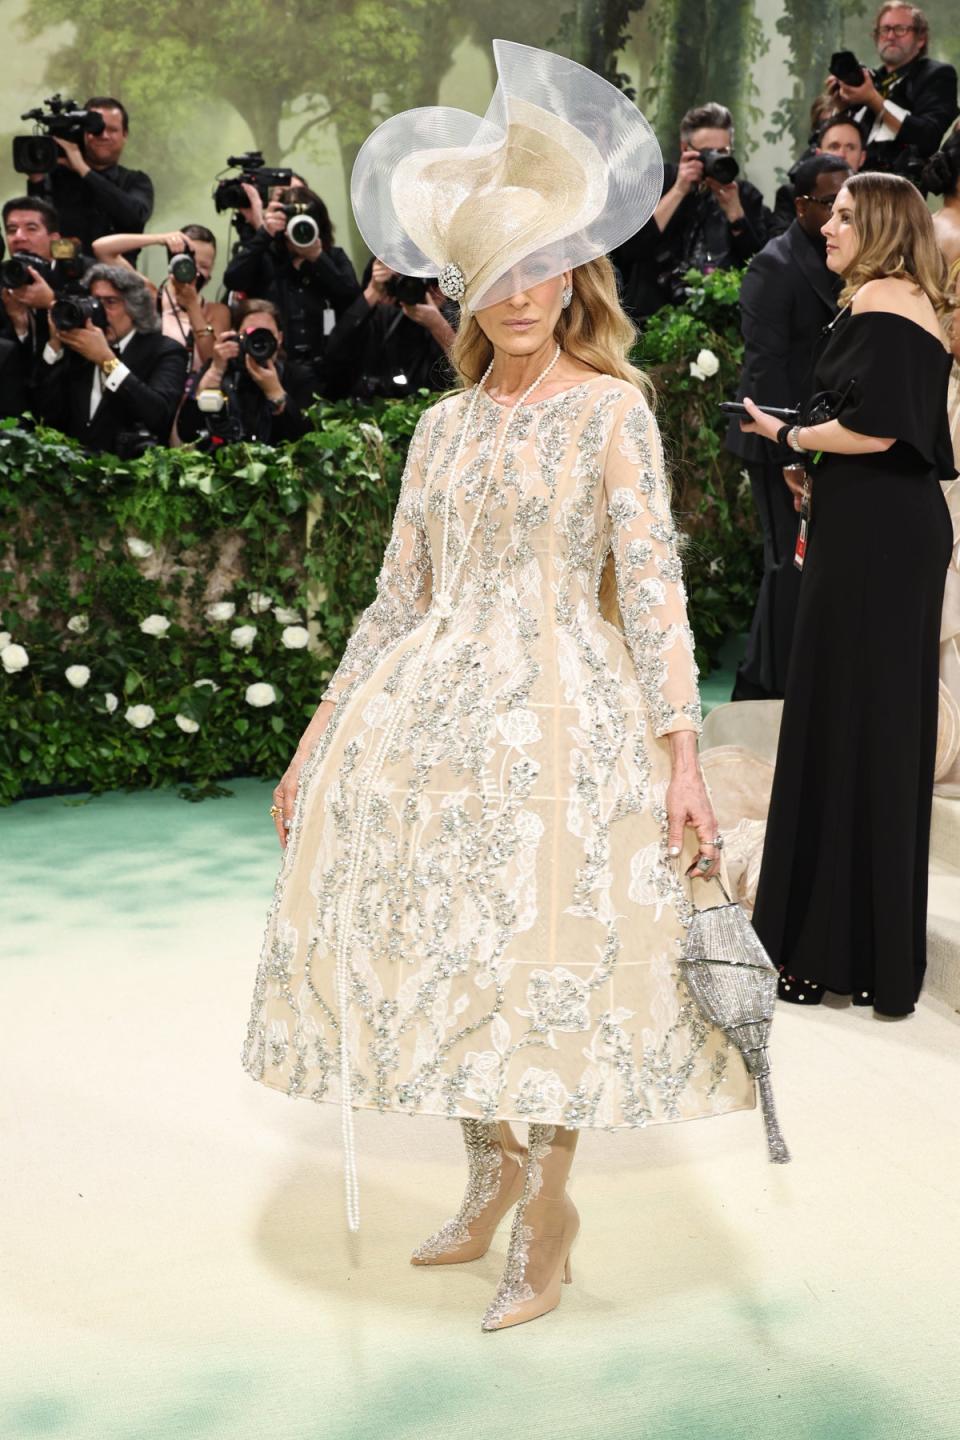 Sarah Jessica Parker in Richard Quinn (Getty Images)